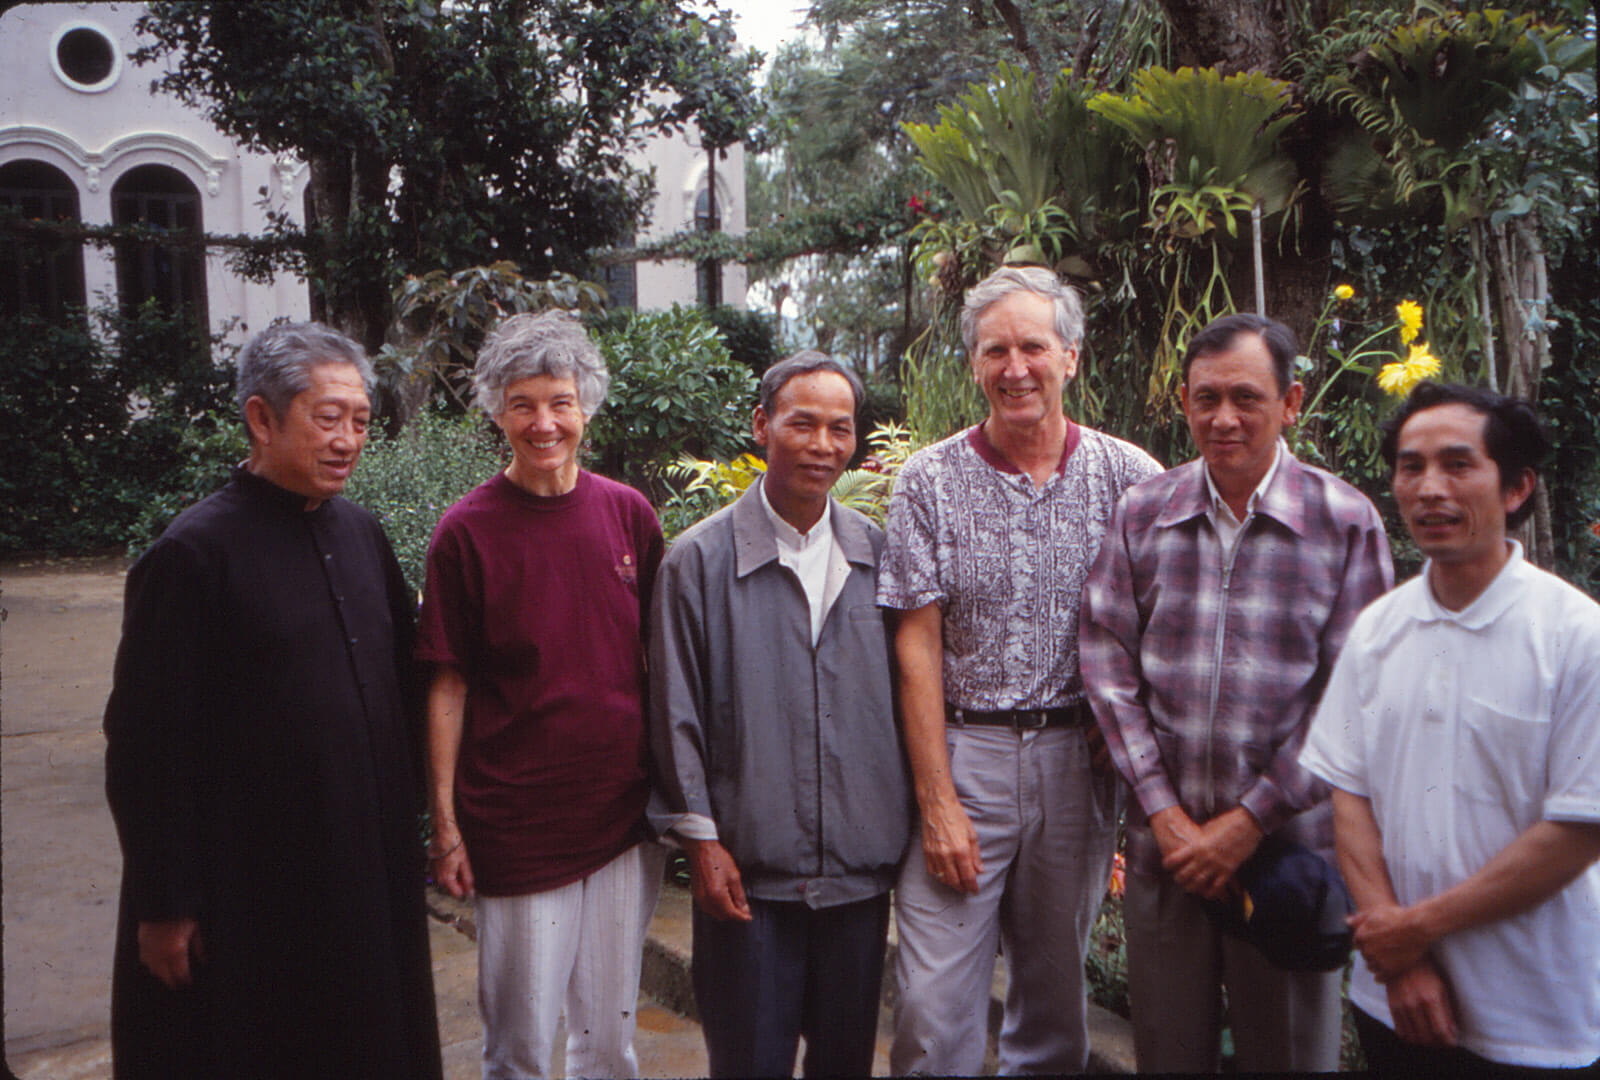 A white woman and man posing with 4 Asian men, one of the men in a black habit.